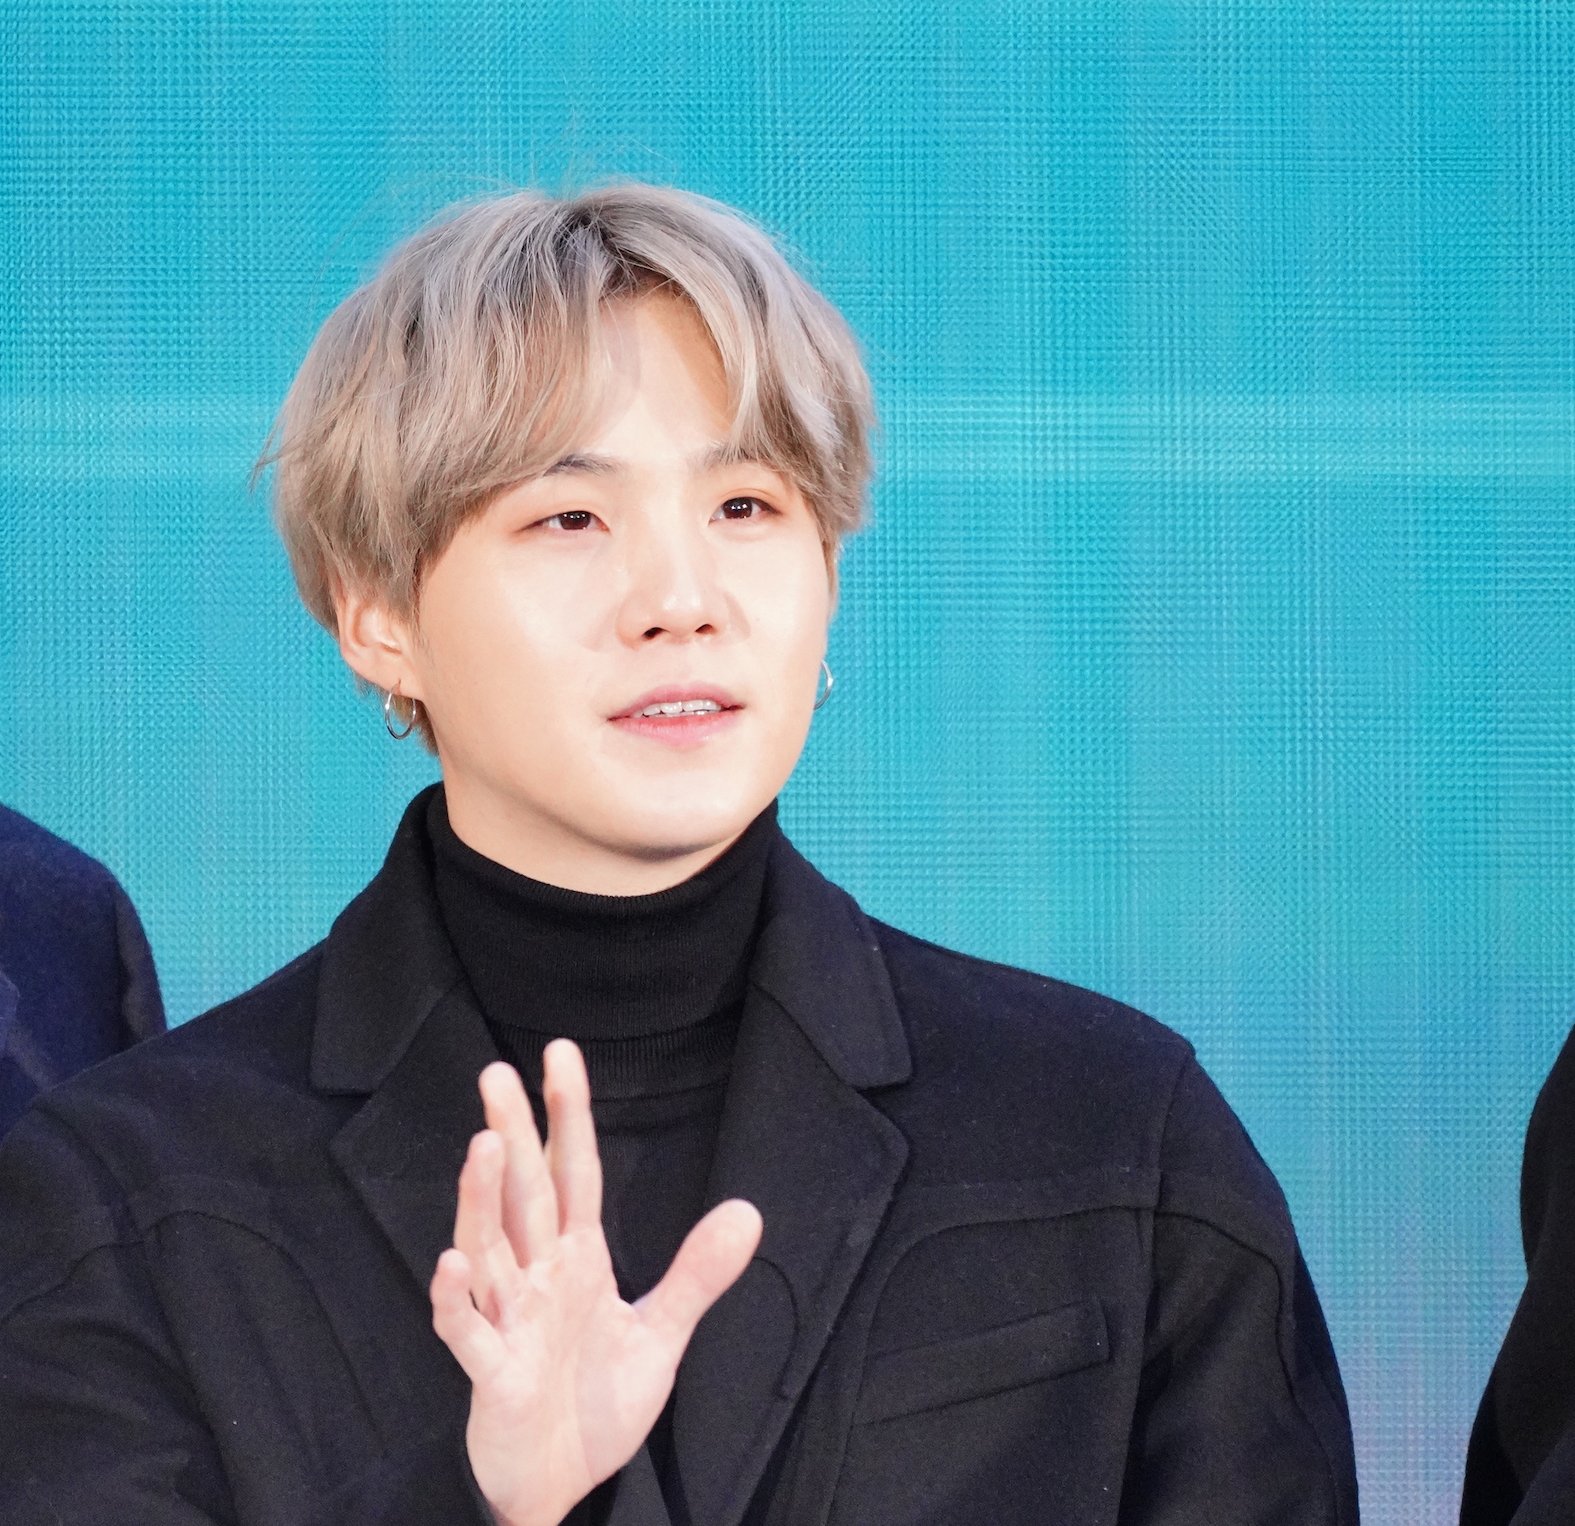 SUGA, also known by his real name Min Yoongi, of the K-pop band BTS